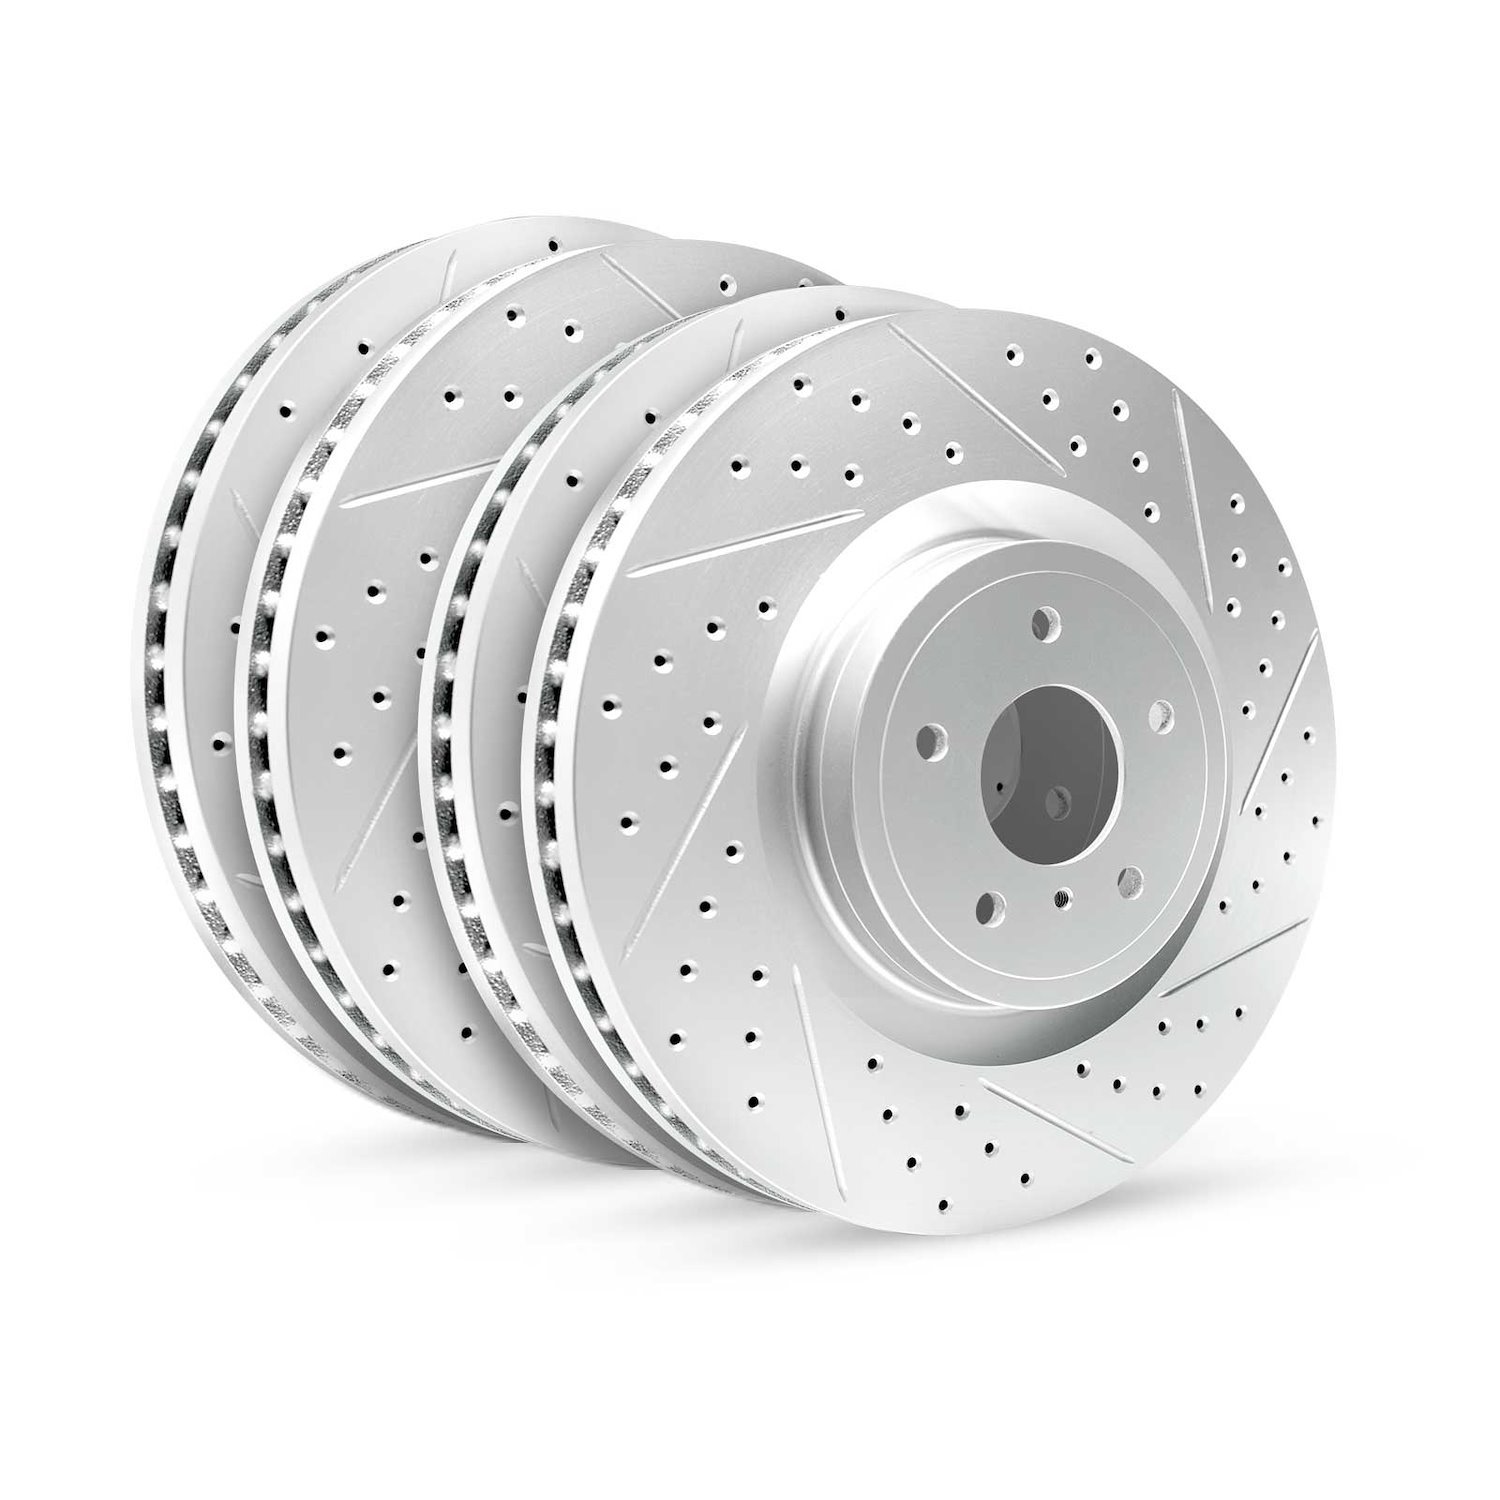 GEO-Carbon Drilled/Slotted Rotors, 1979-1985 Mercedes-Benz,